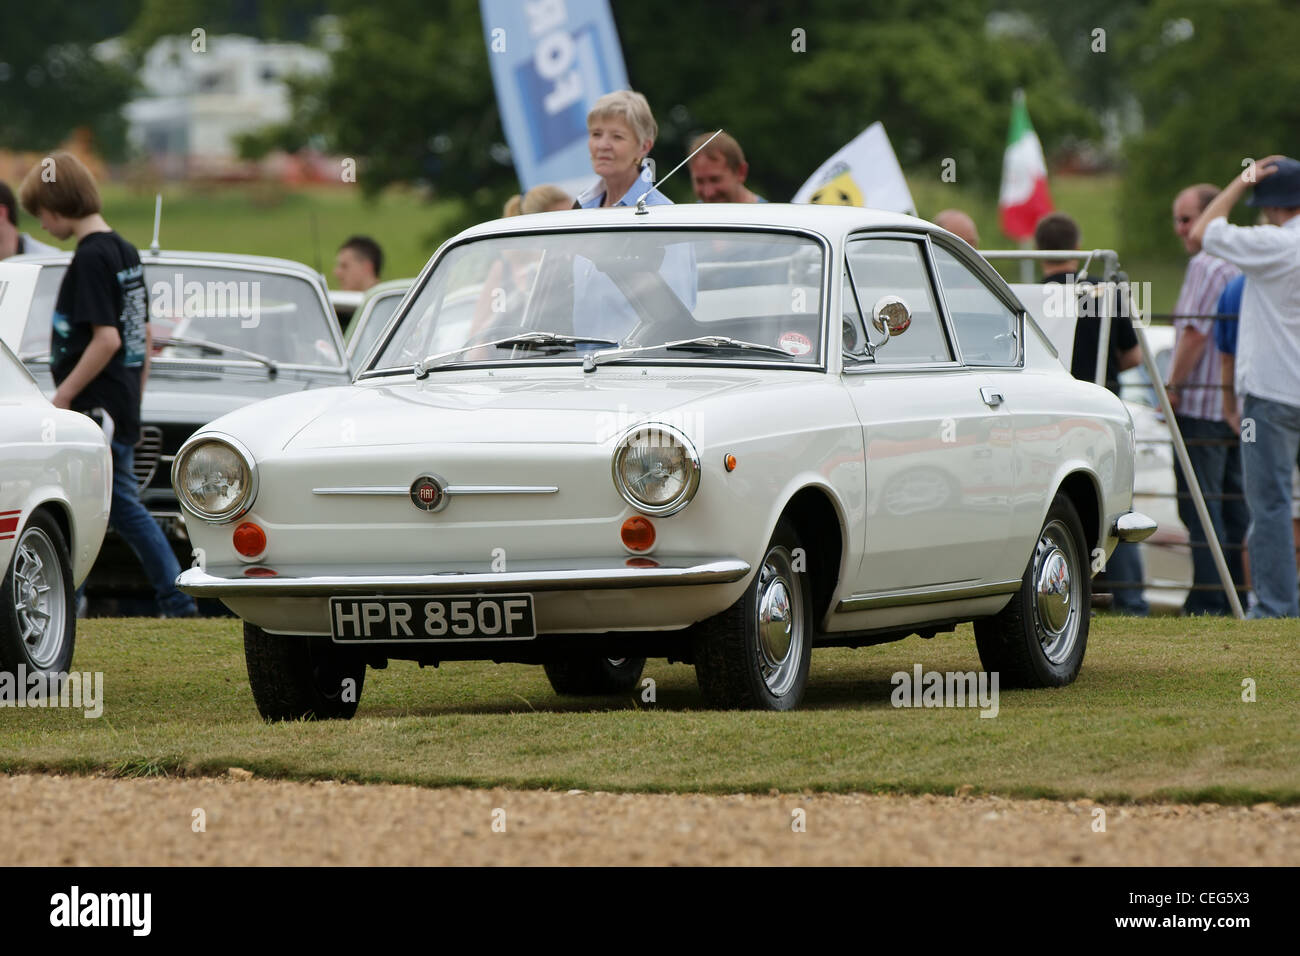 Top 93+ images fiat 850 coupe 1967 - In.thptnganamst.edu.vn